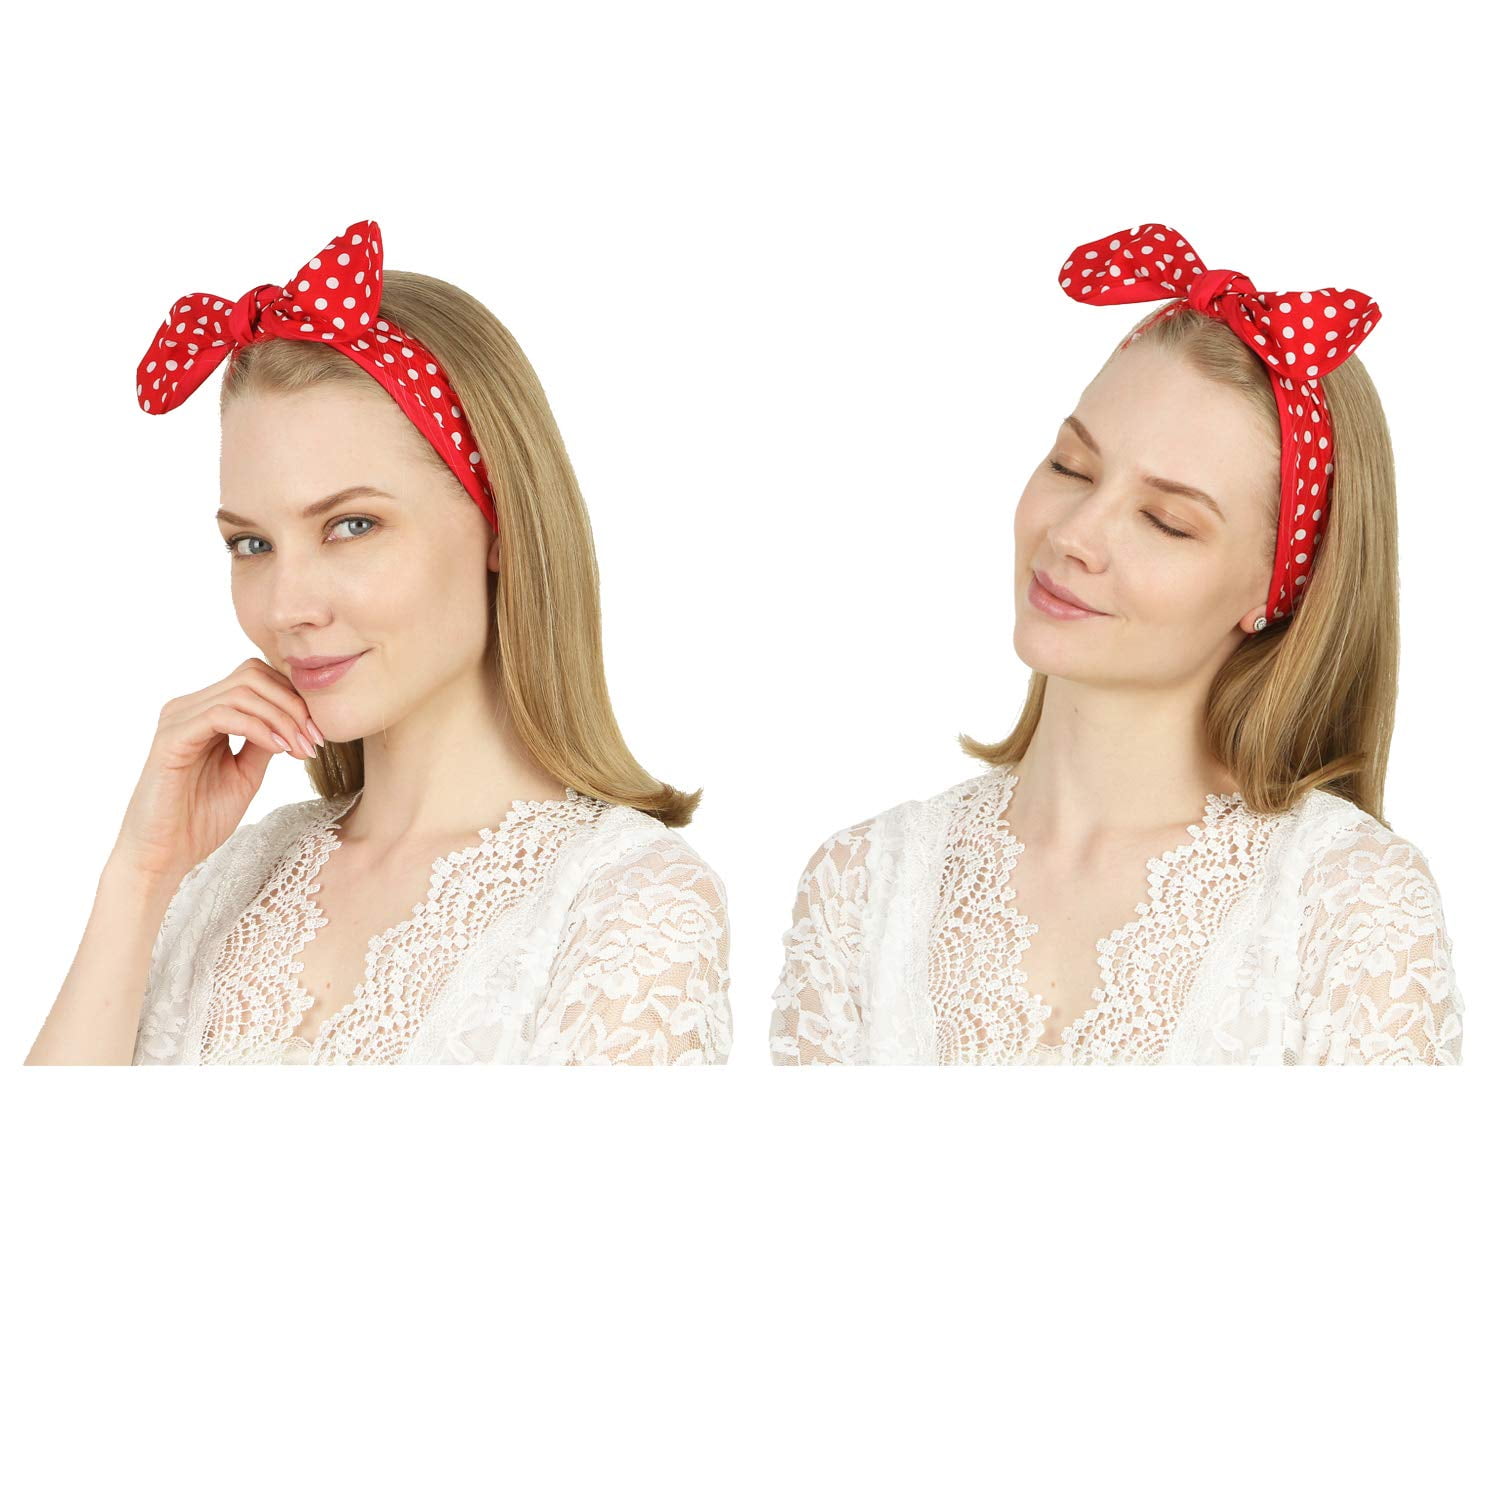 Cotton Headband Bows Red with White Polka Dots Double Wide Headwrap Head Band 